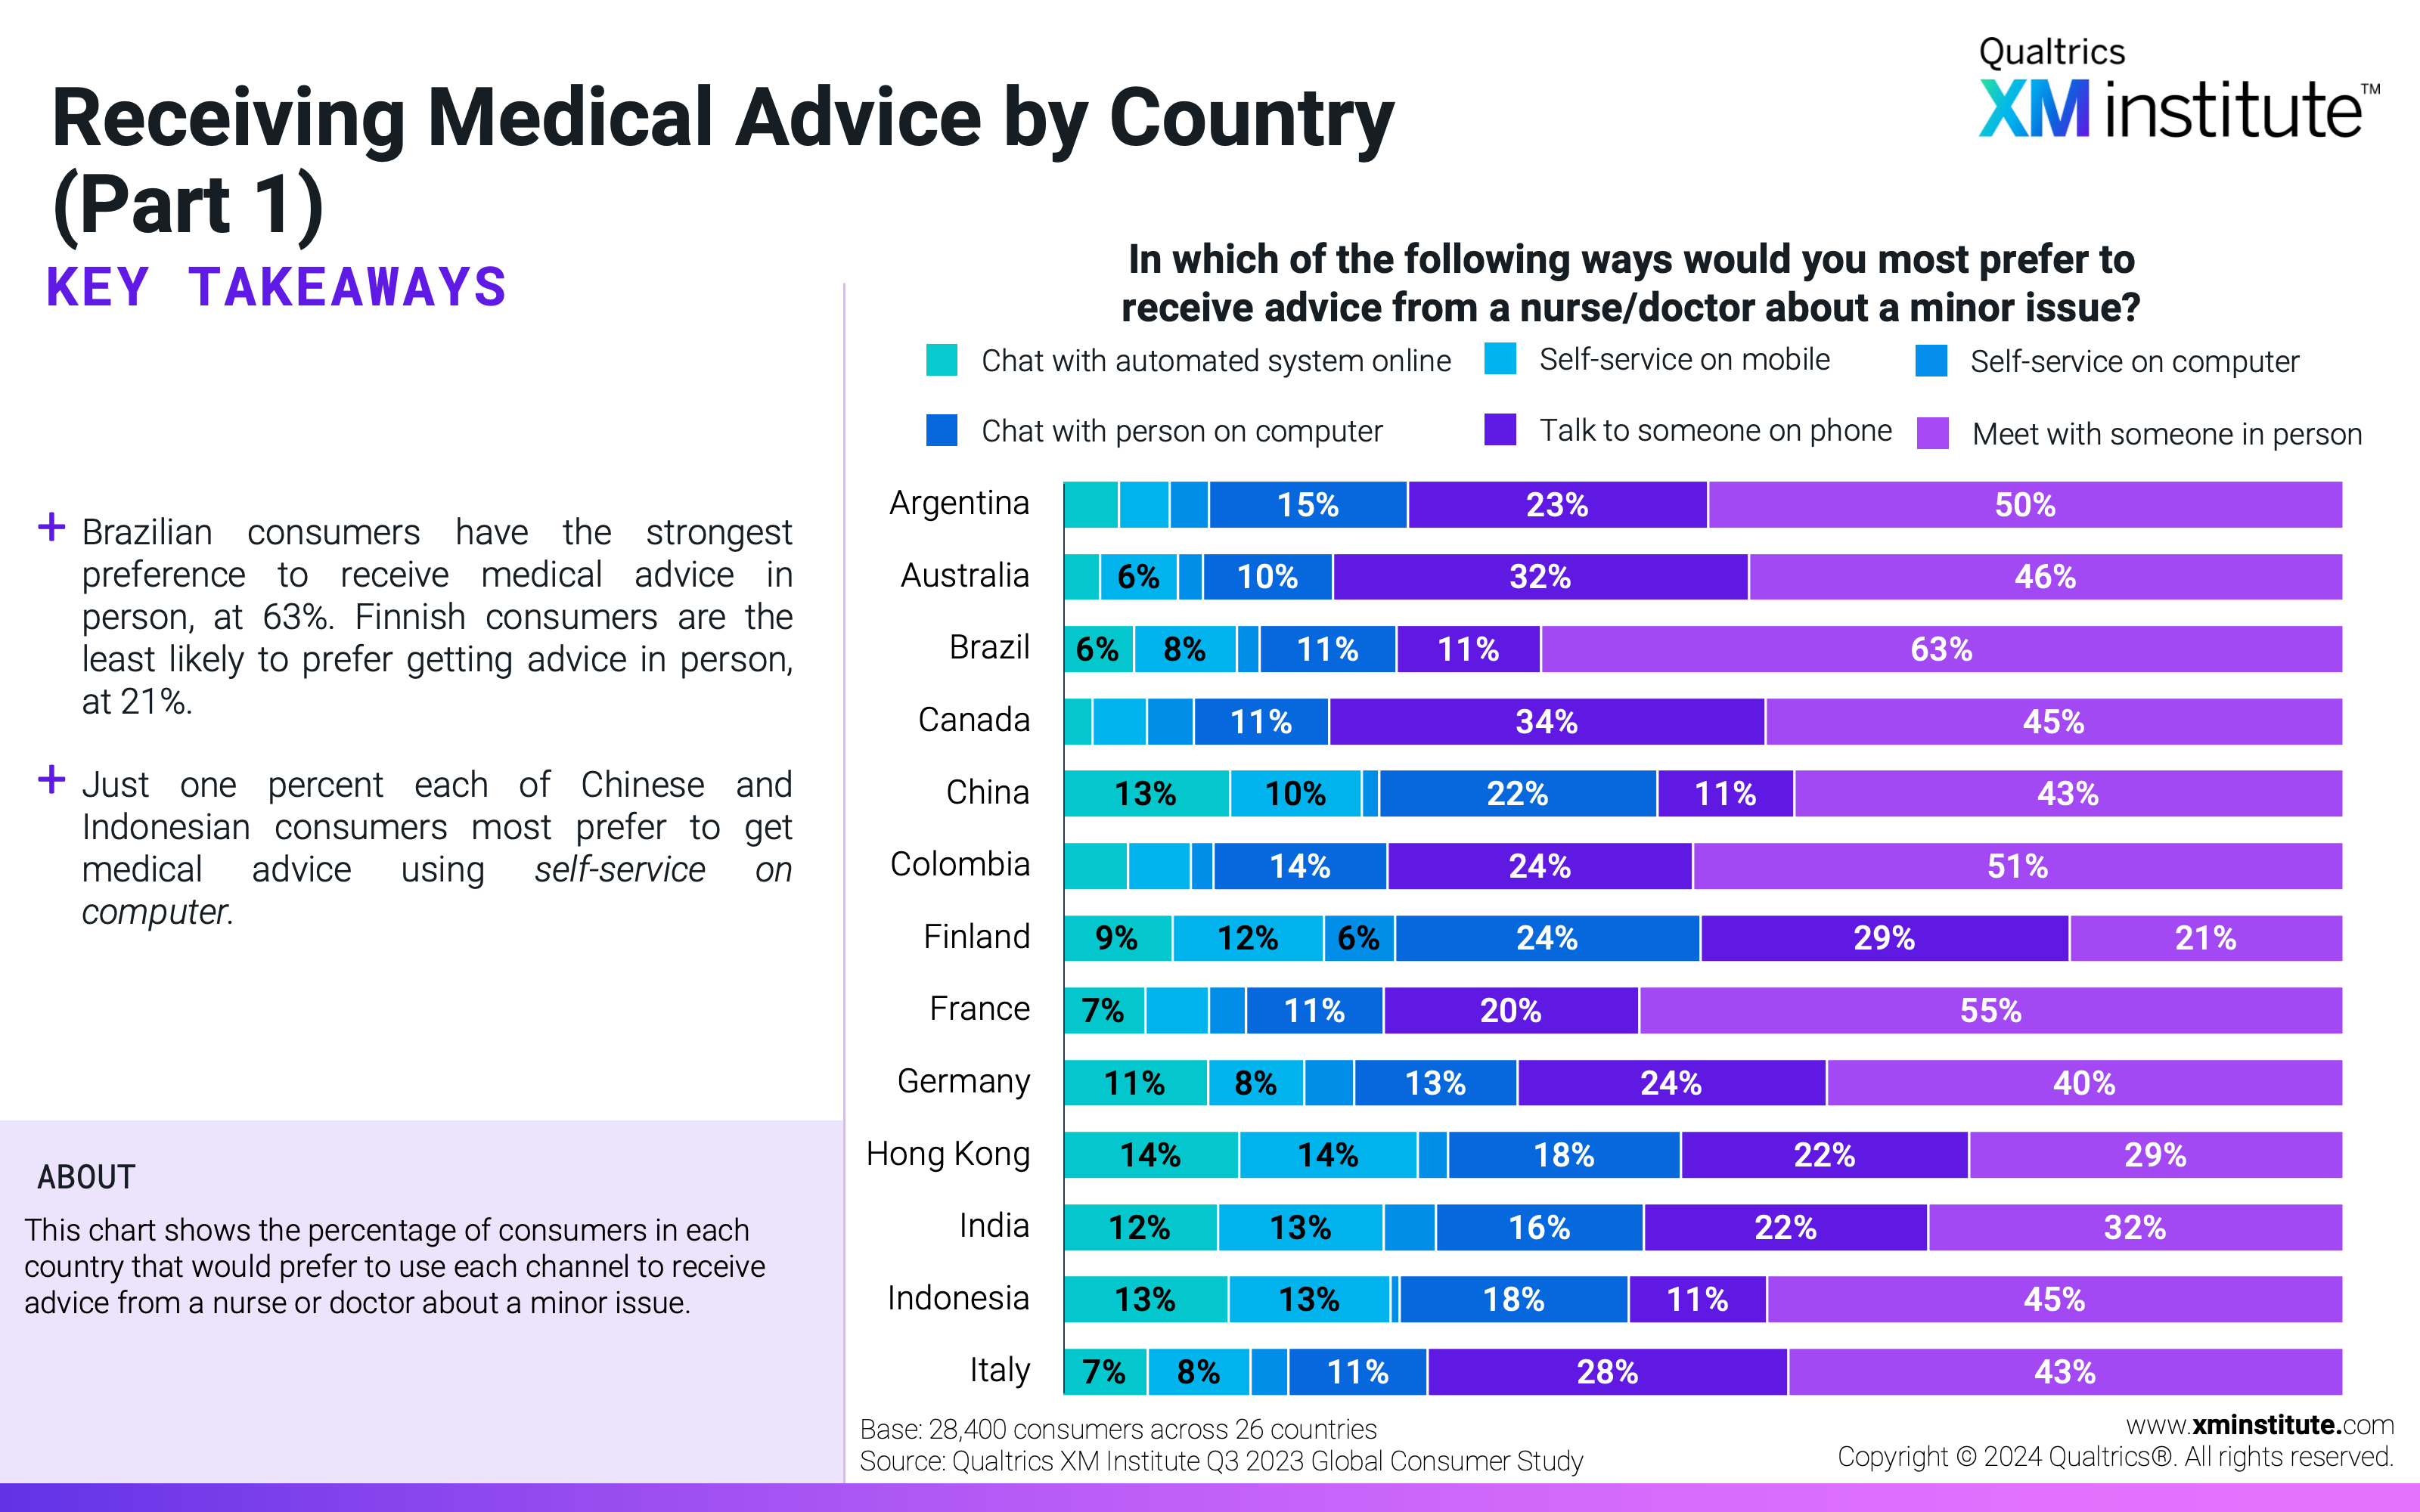 This chart shows the percentage of consumers in each country that would prefer to use each channel to receive advice from a nurse or doctor about a minor issue. 